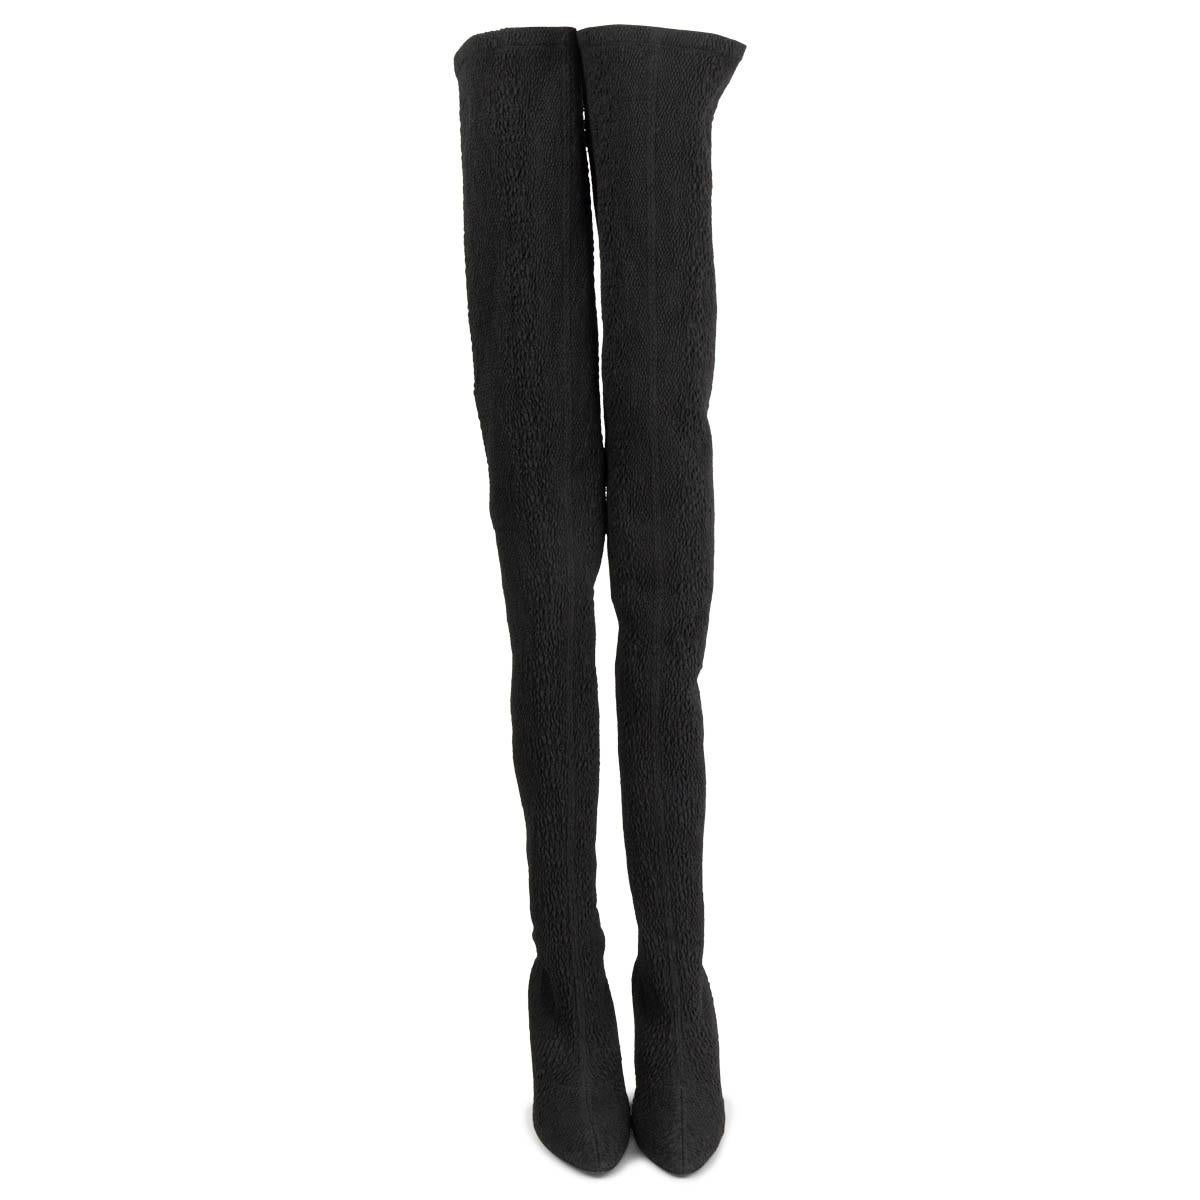 100% authentic Saint Laurent Koller over-the-knee boots are made from black tactile stretch-cloqué that has a sock-like fit through the calves and thighs. They have internal rubberized trims to keep them in place as you walk. Have been worn once